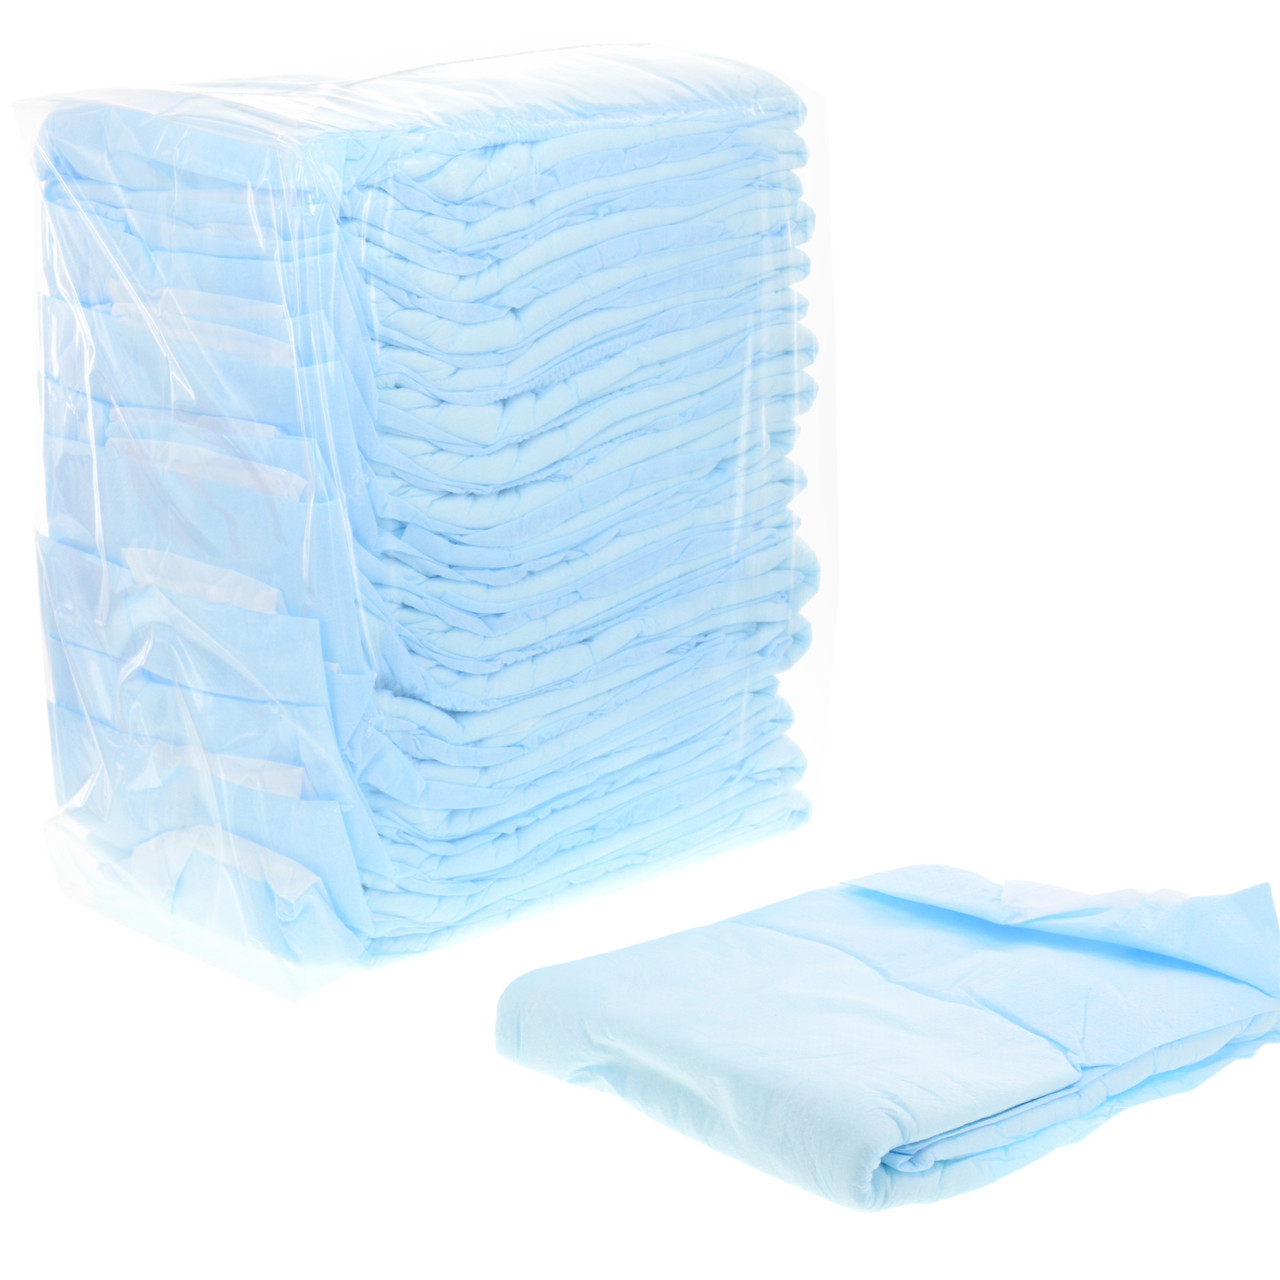 Adult Diapers with Tabs for Incontinence - Personally Delivered Blog